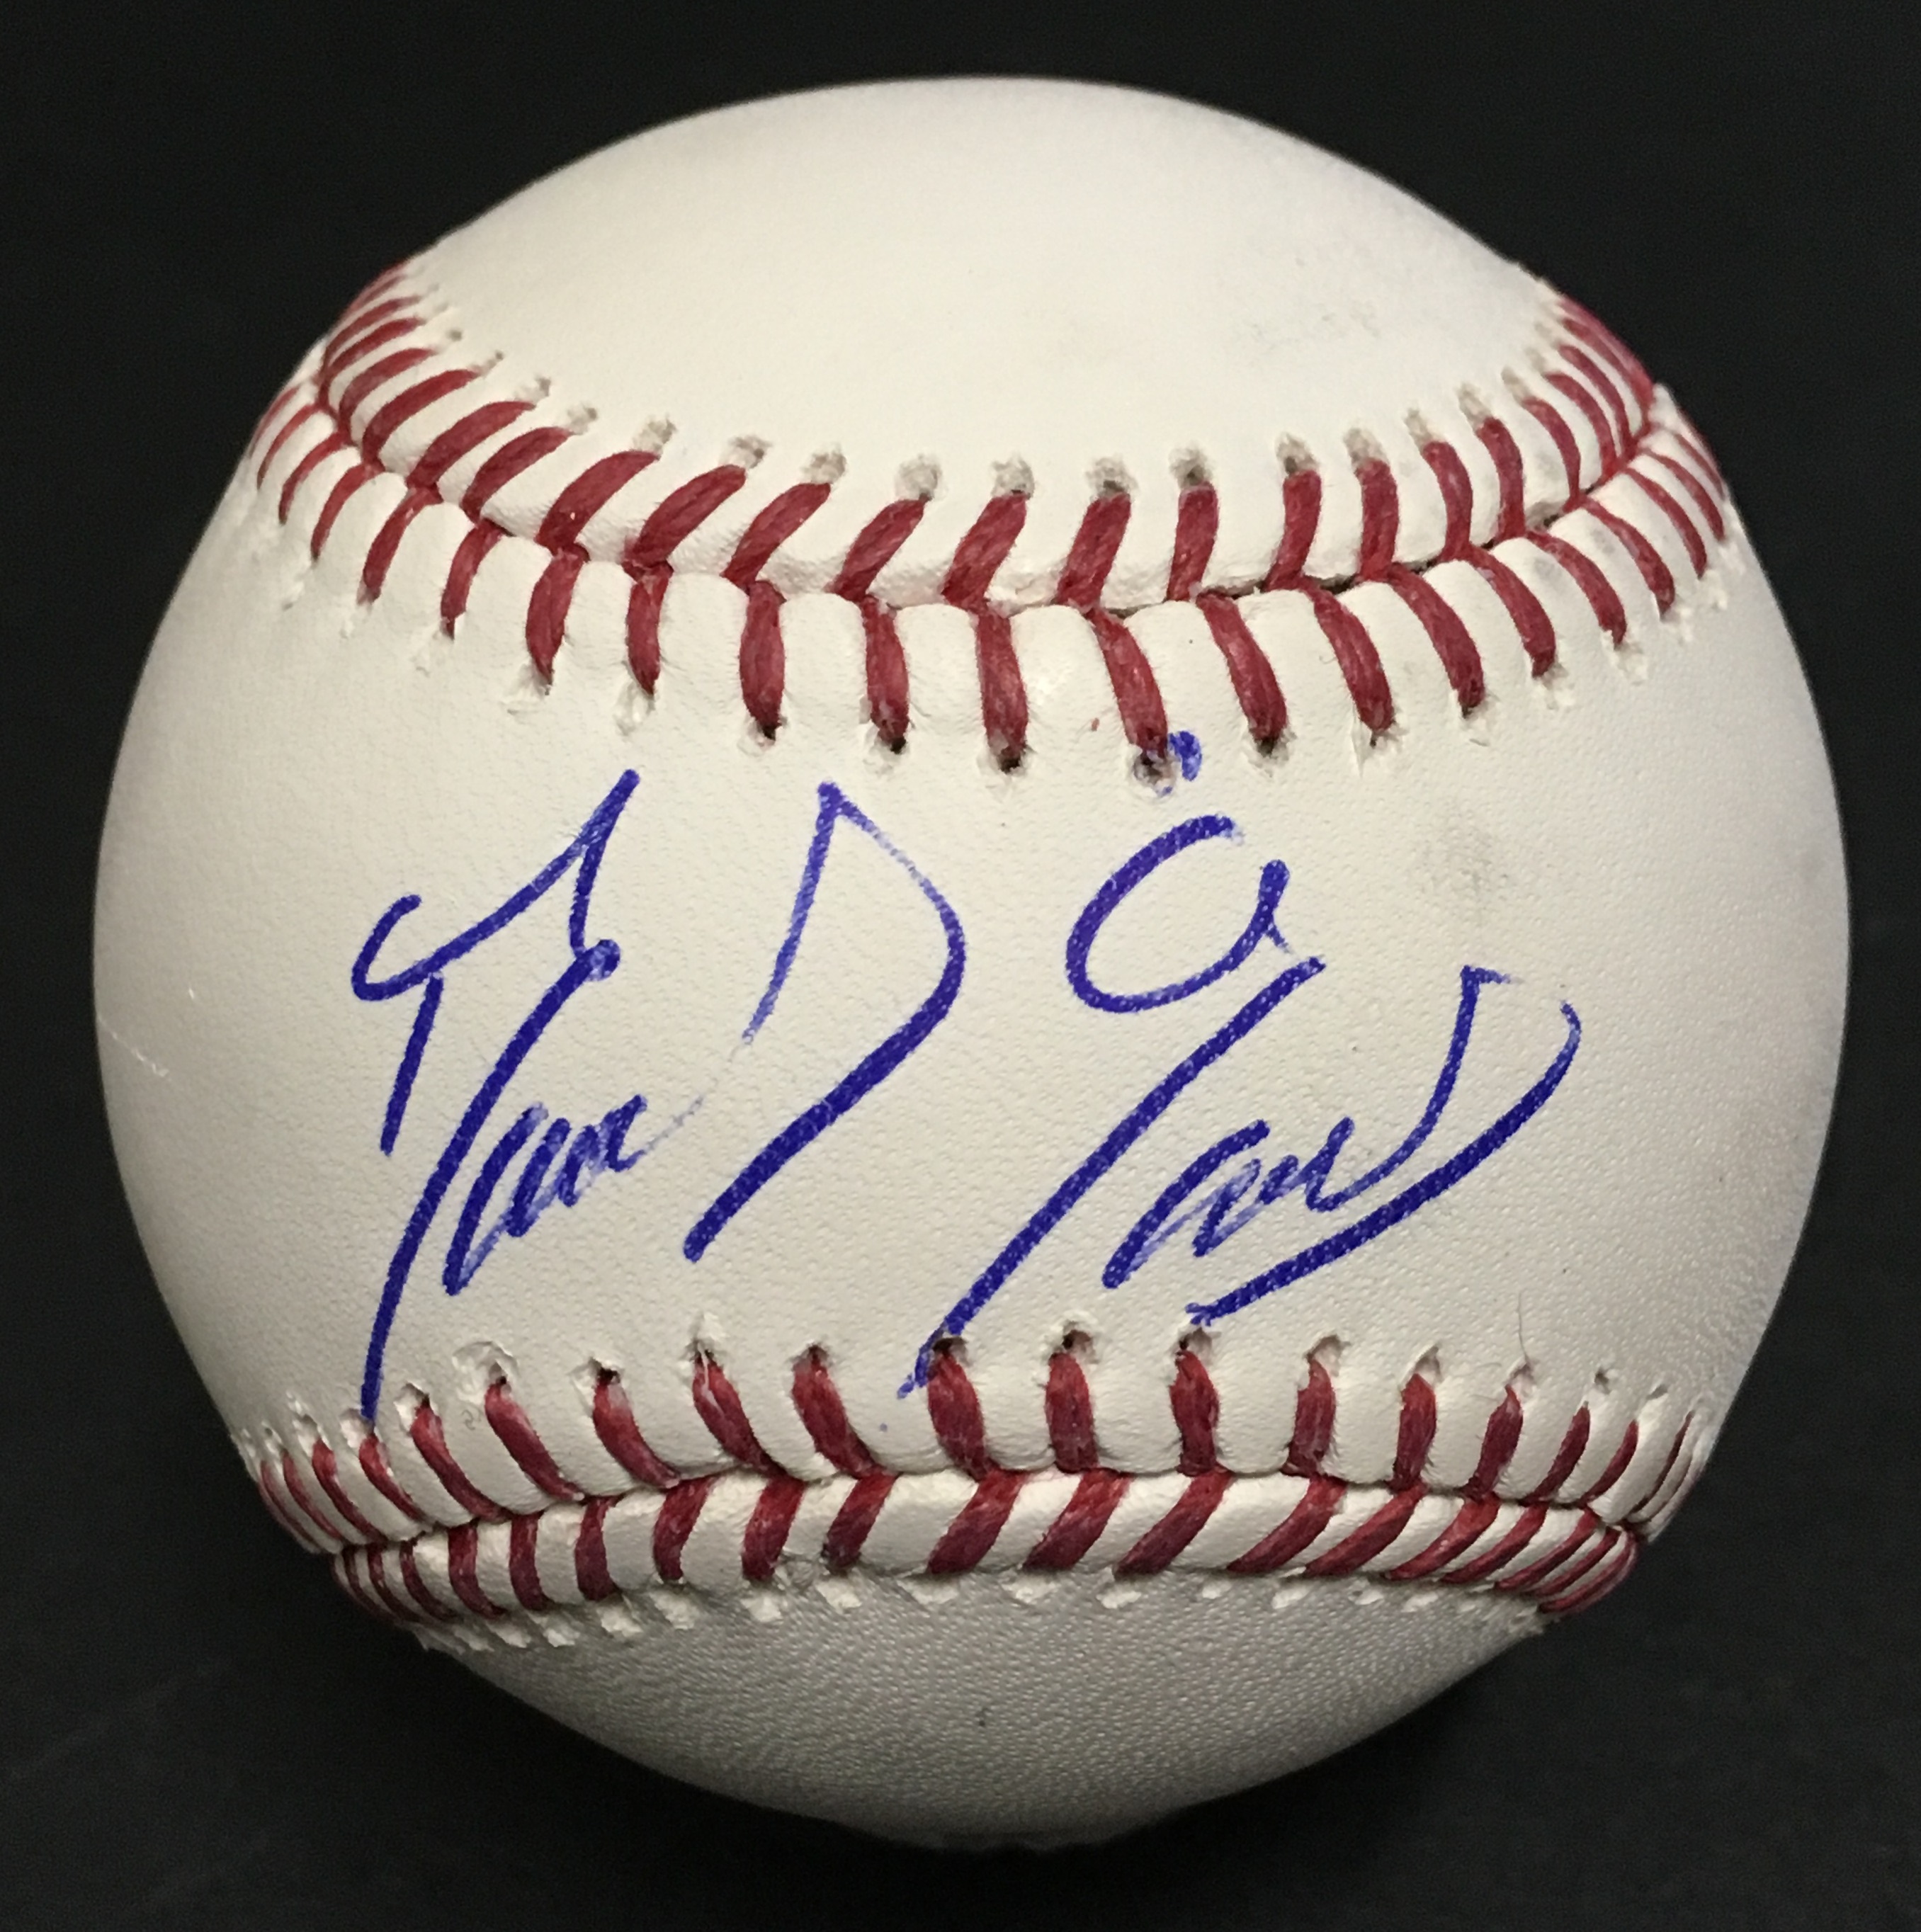 Domingo German signed MLB Baseball Yankees rookie autograph In Store PSA/DNA COA